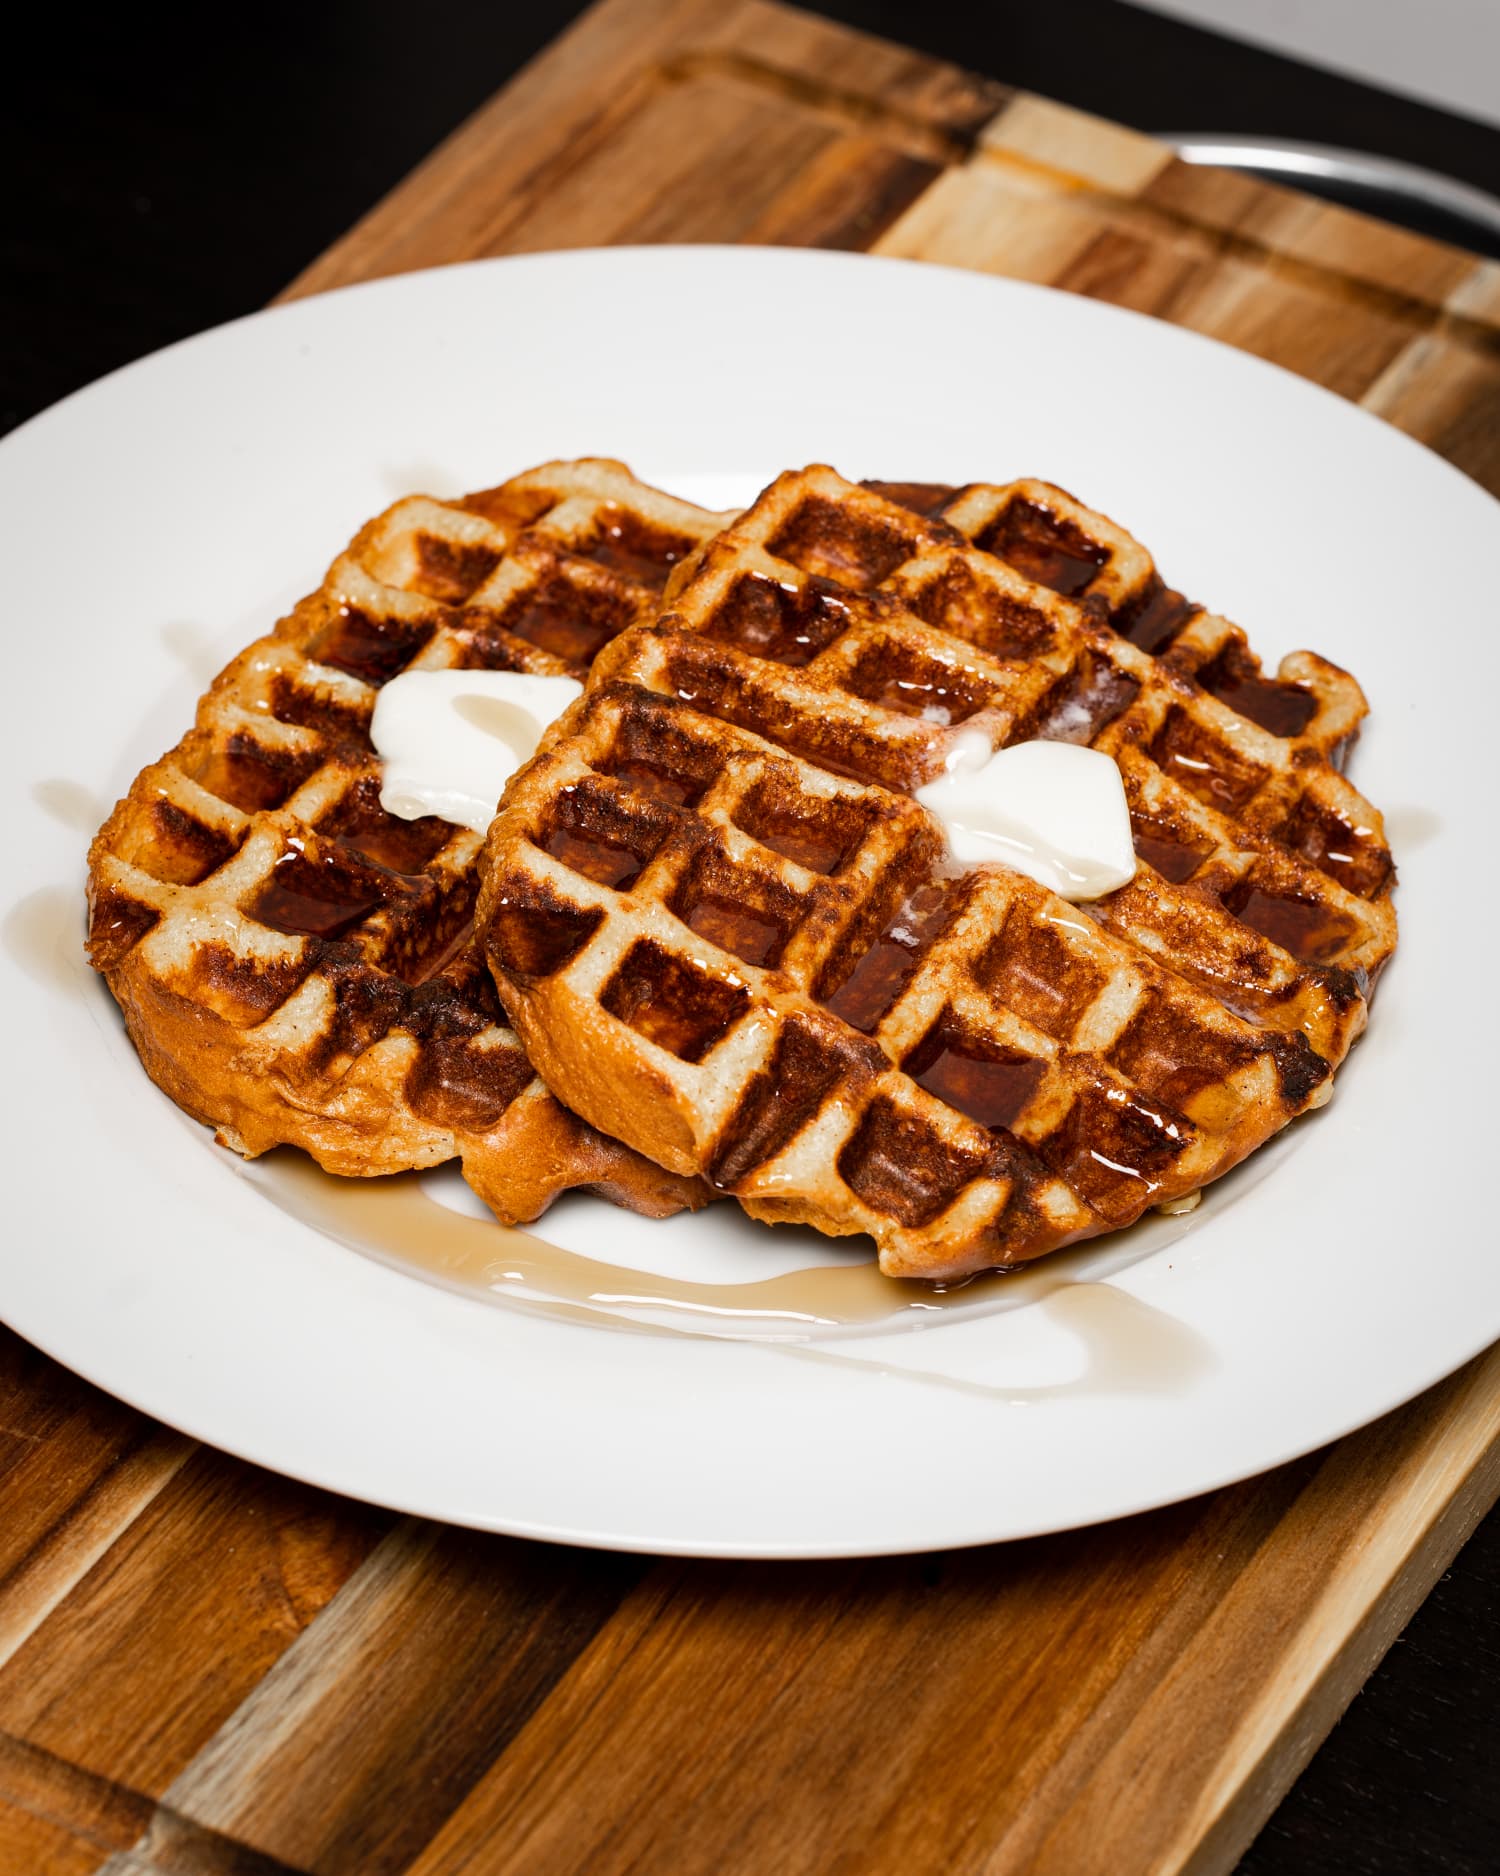 I Tried This Waffle French Toast Recipe and It’s the Best of Both Worlds